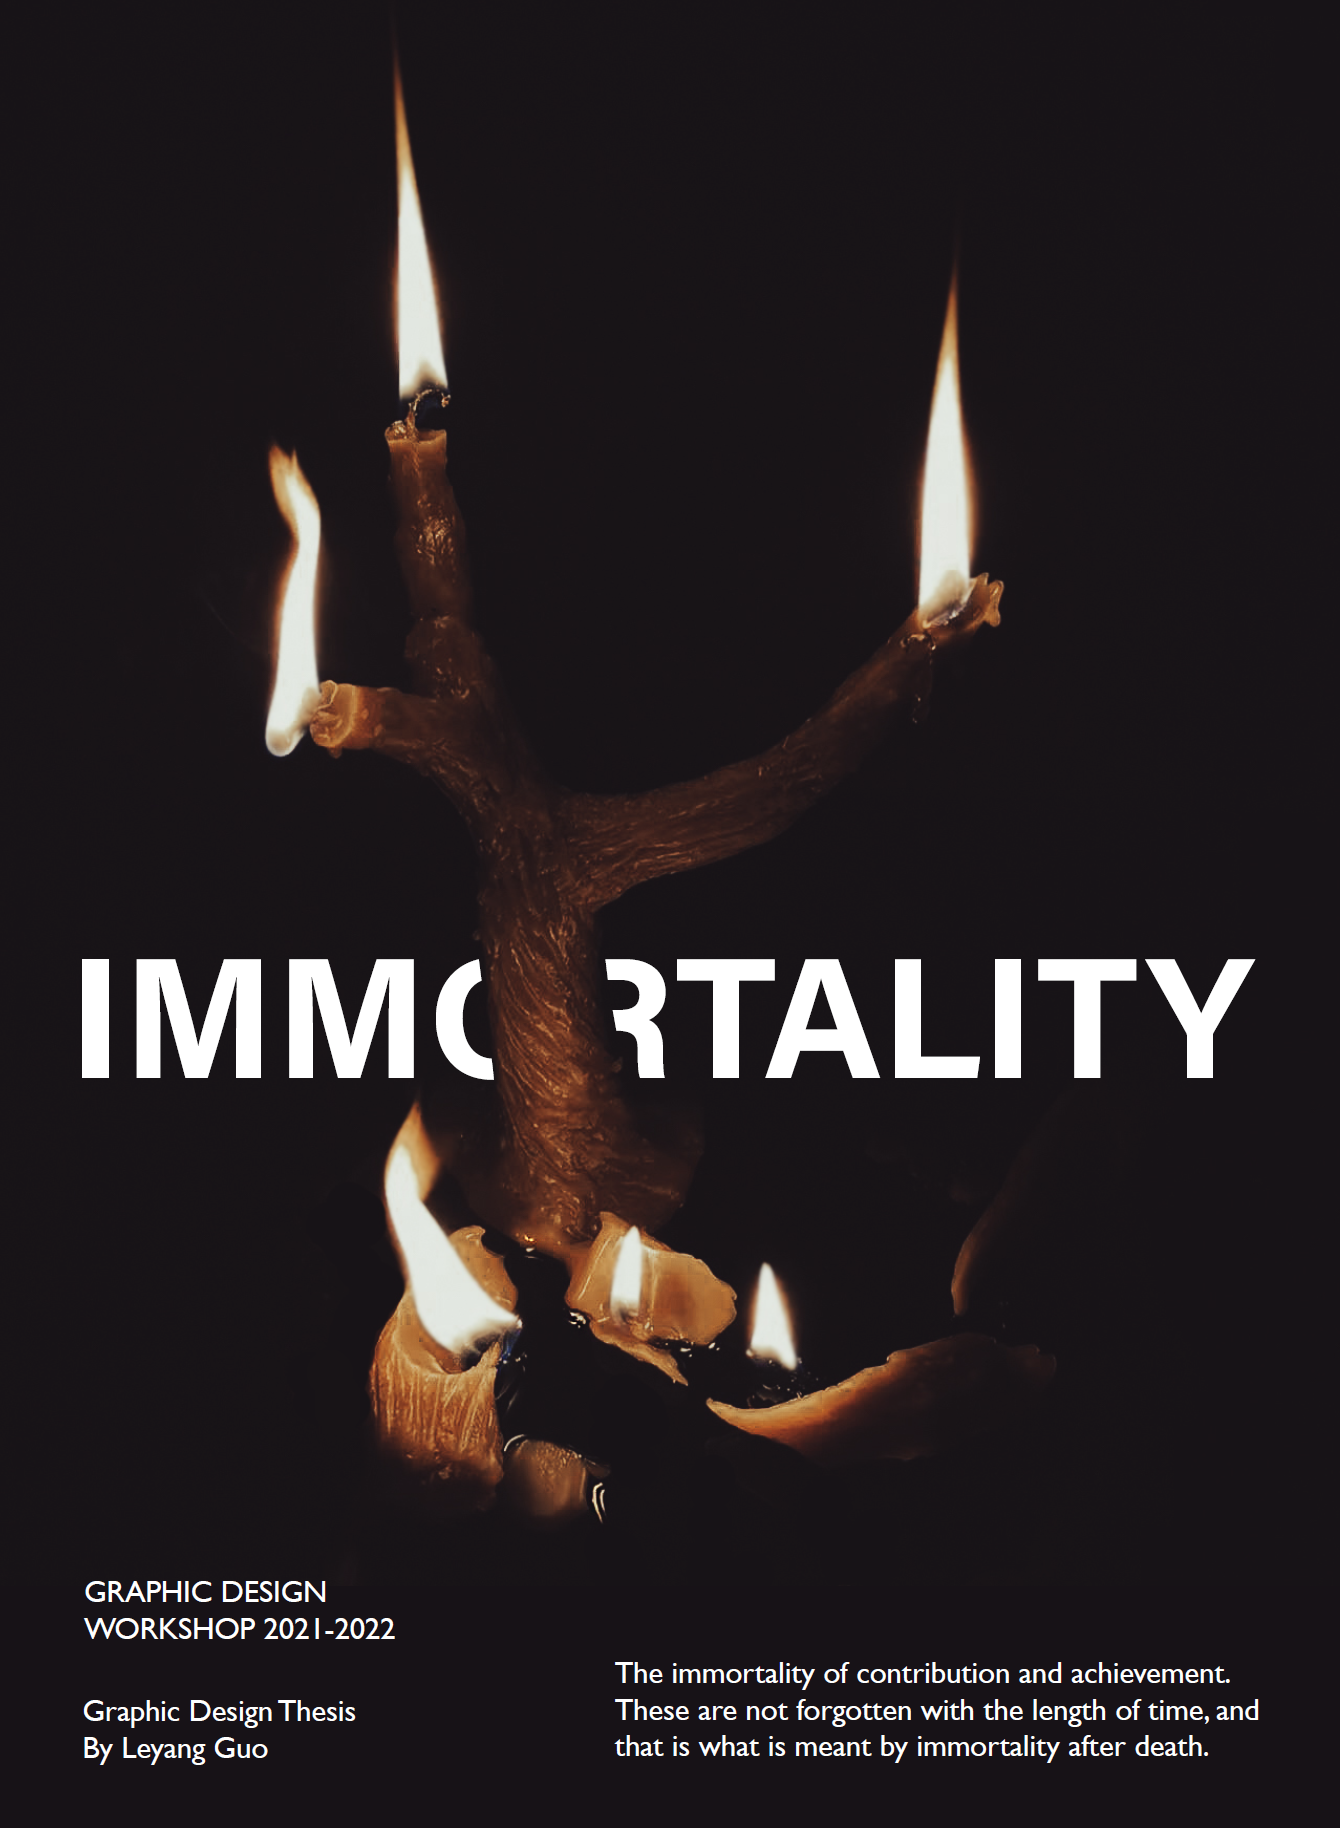 The Longing of Immortality